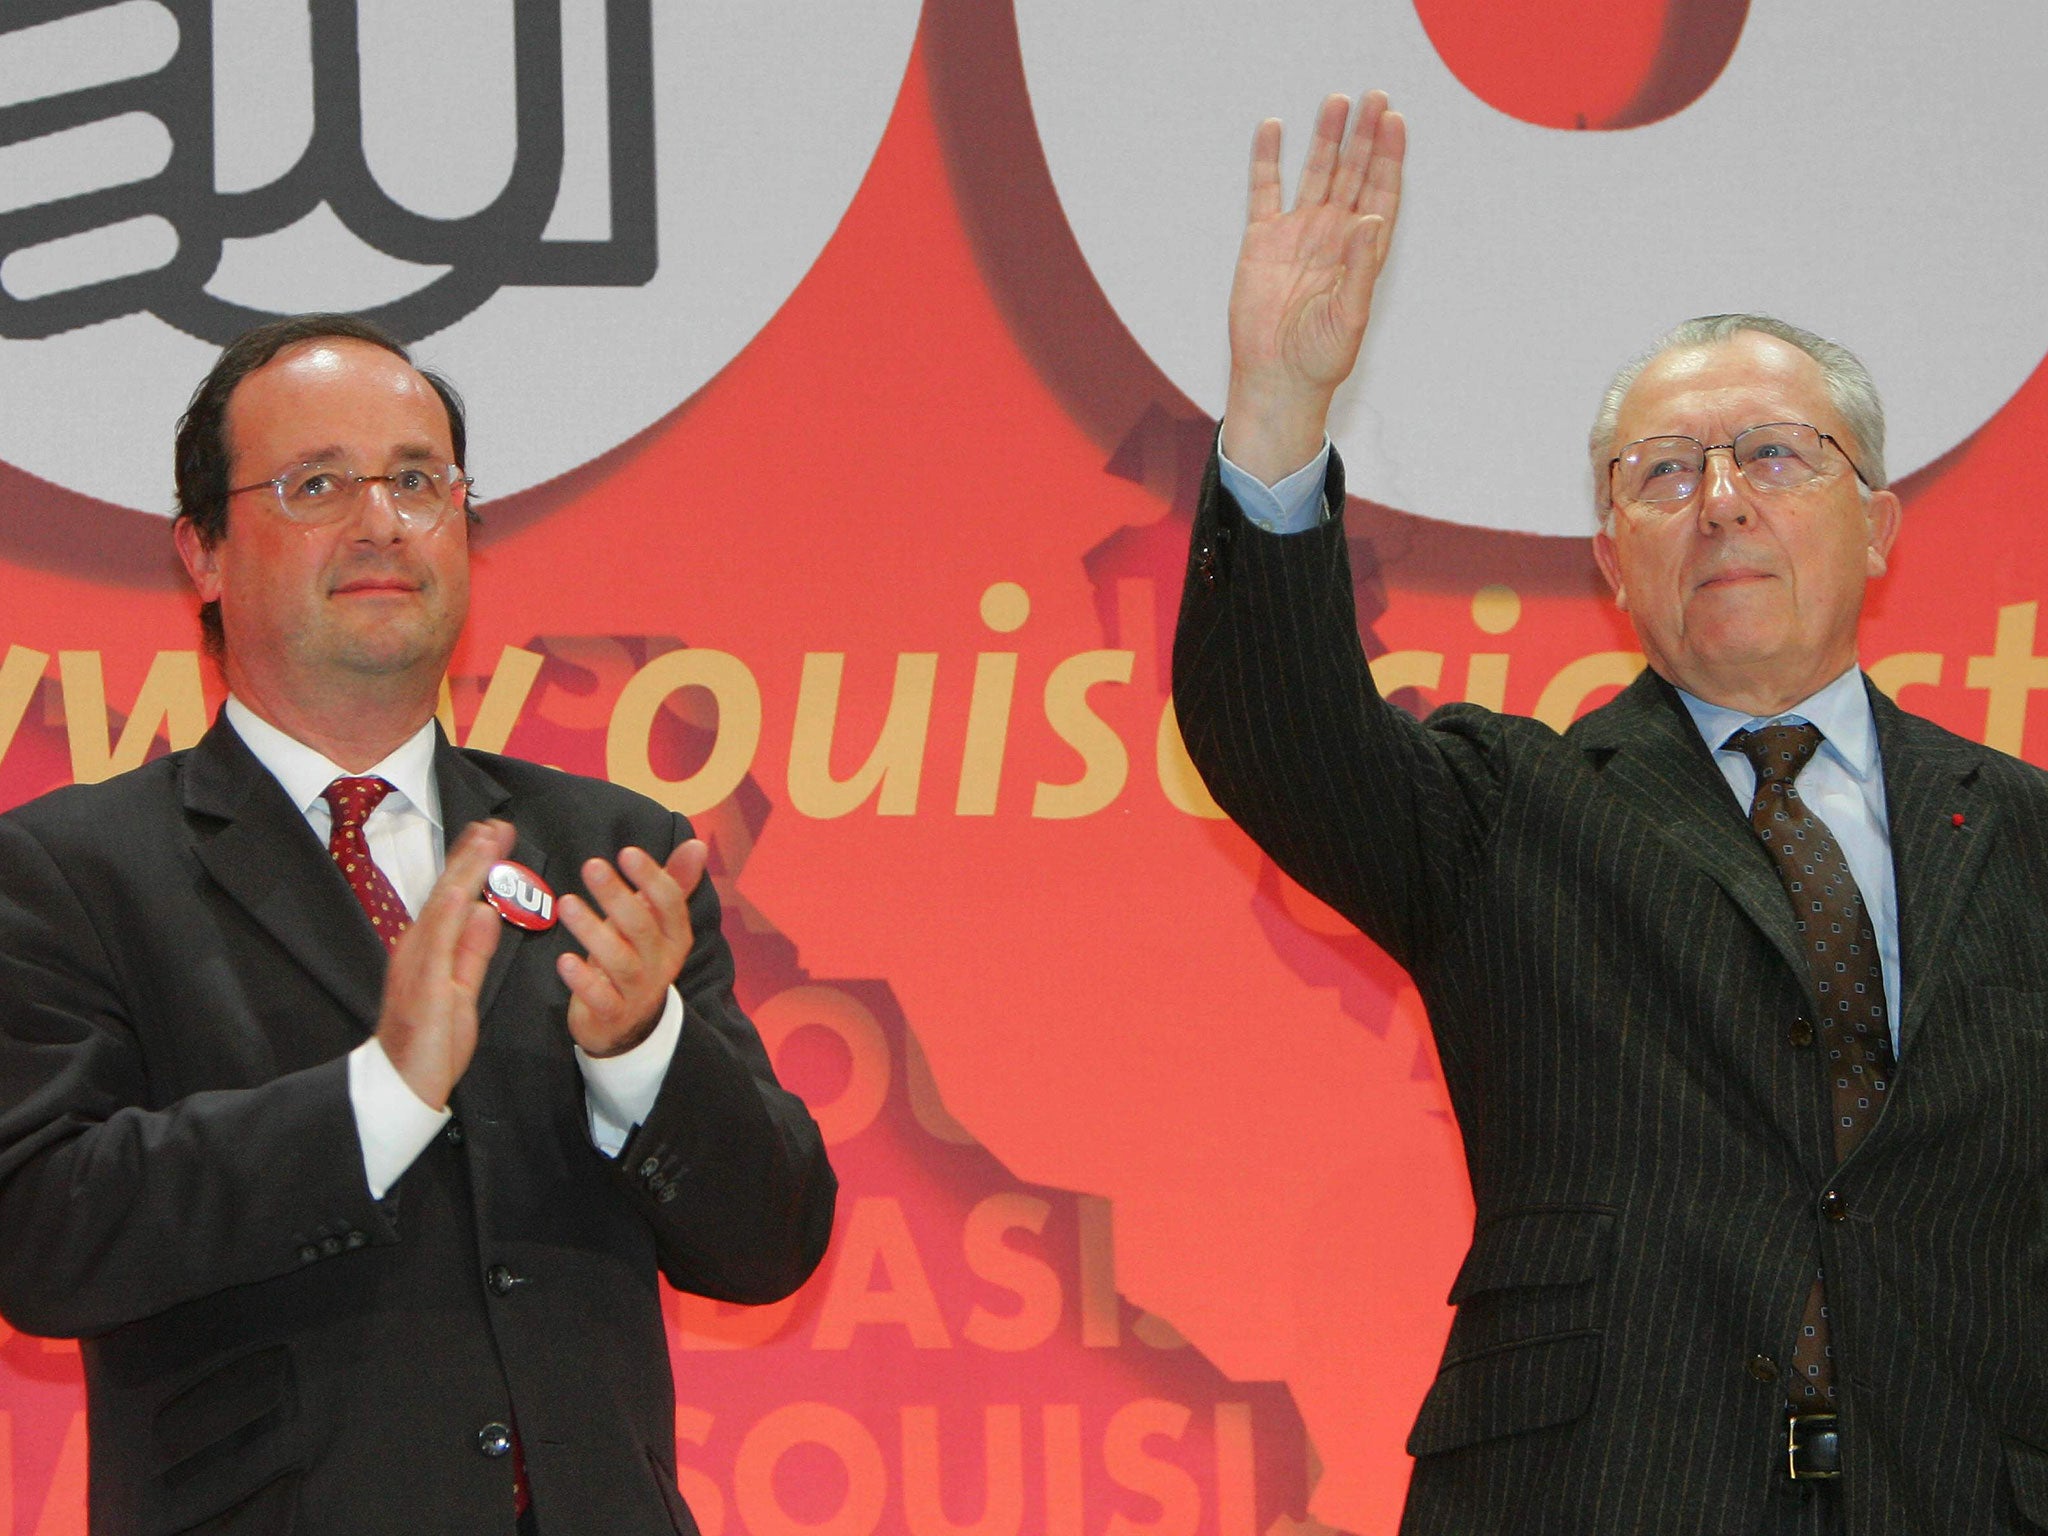 François Hollande, left, used the birthday of Jacques Delors, with whom he campaigned for a Yes vote in a 2005 EU referendum, to call for the currency bloc to move towards a federal system